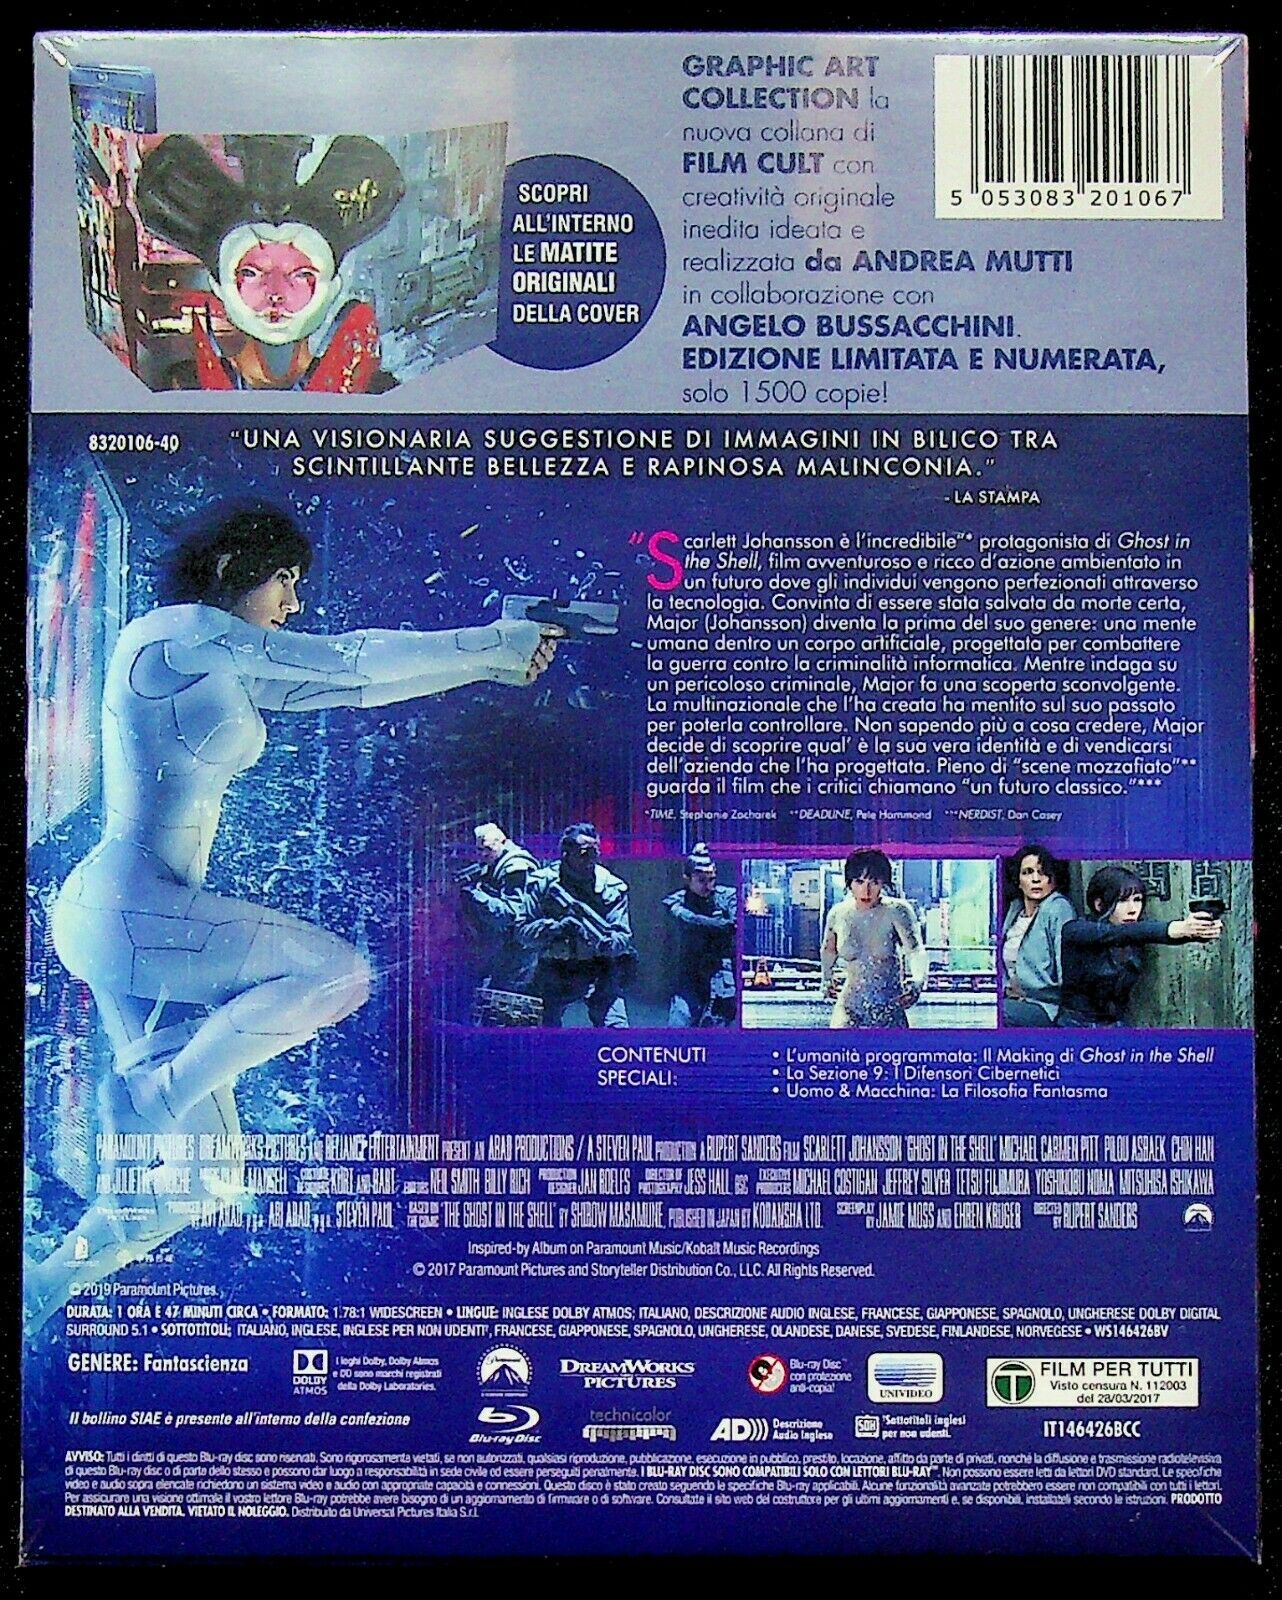 EBOND Ghost In The Shell (graphic Art Collection) BLURAY Ed. Limitata BLURAY DS008019